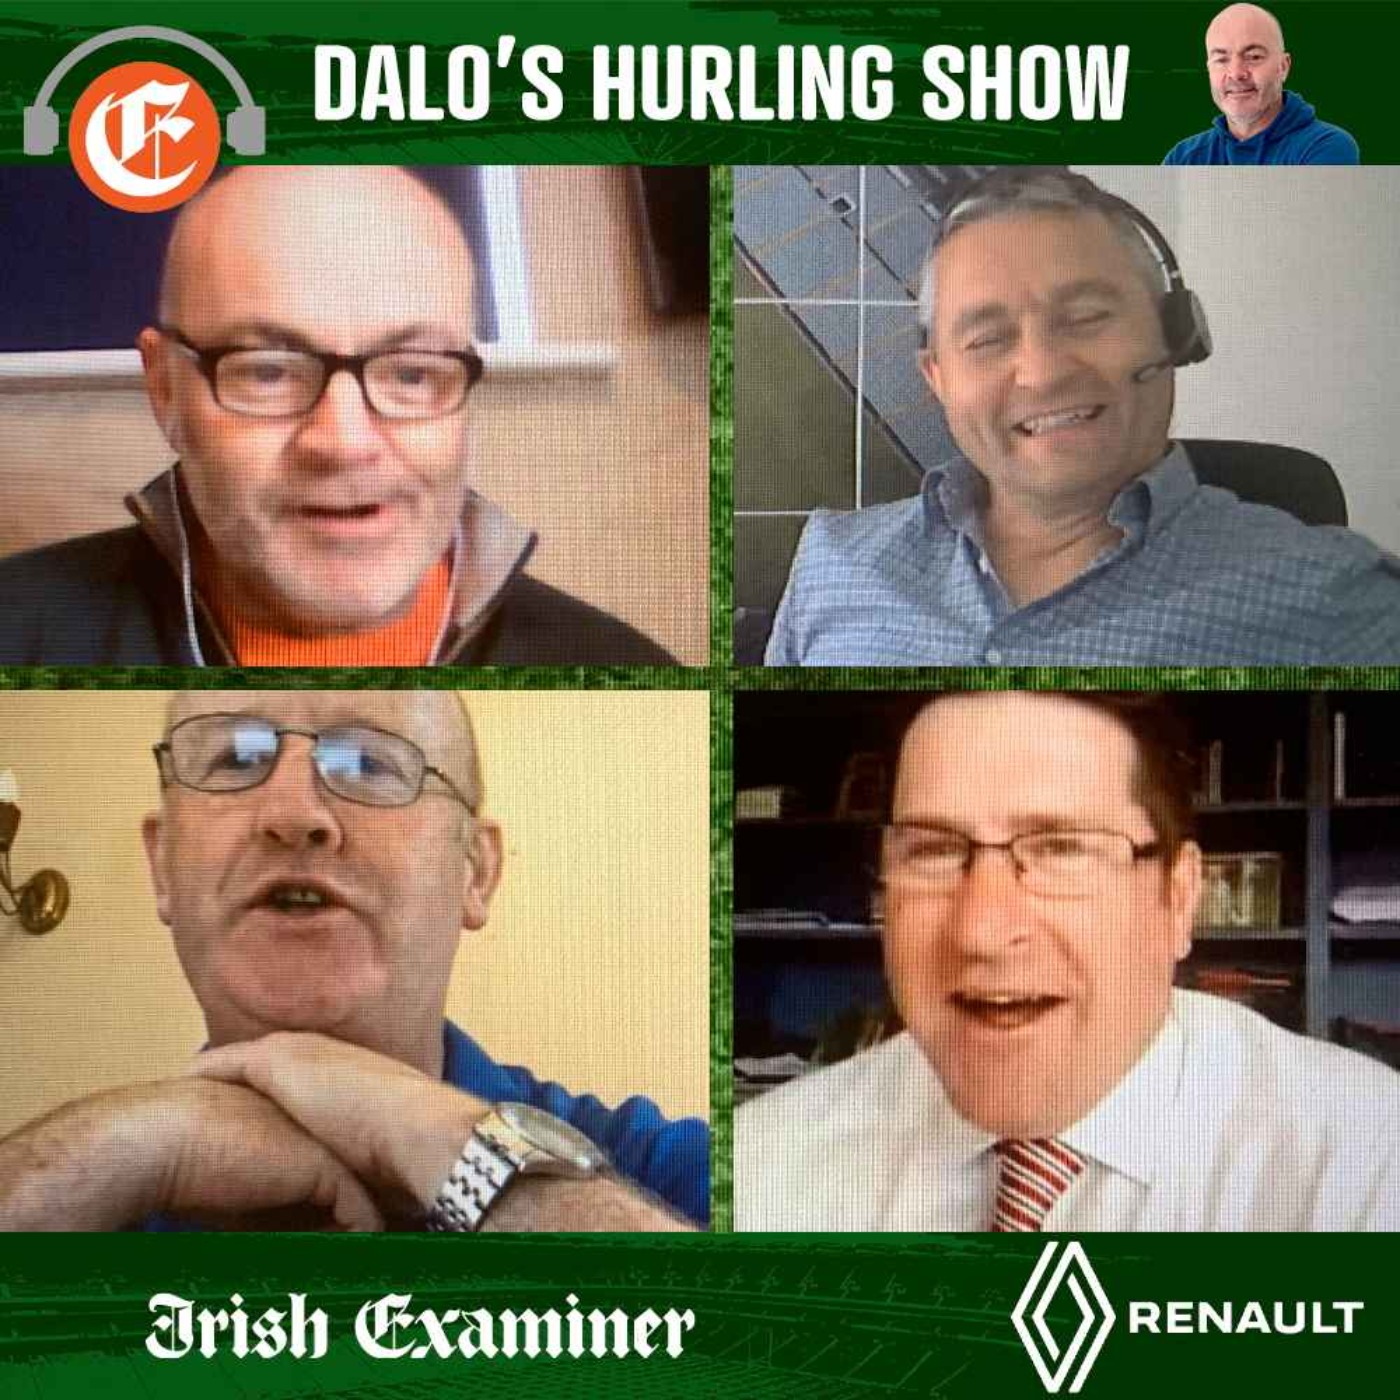 Dalo’s Hurling Show:  Technicalities, confusion, disarray but still two cracking quarters in store